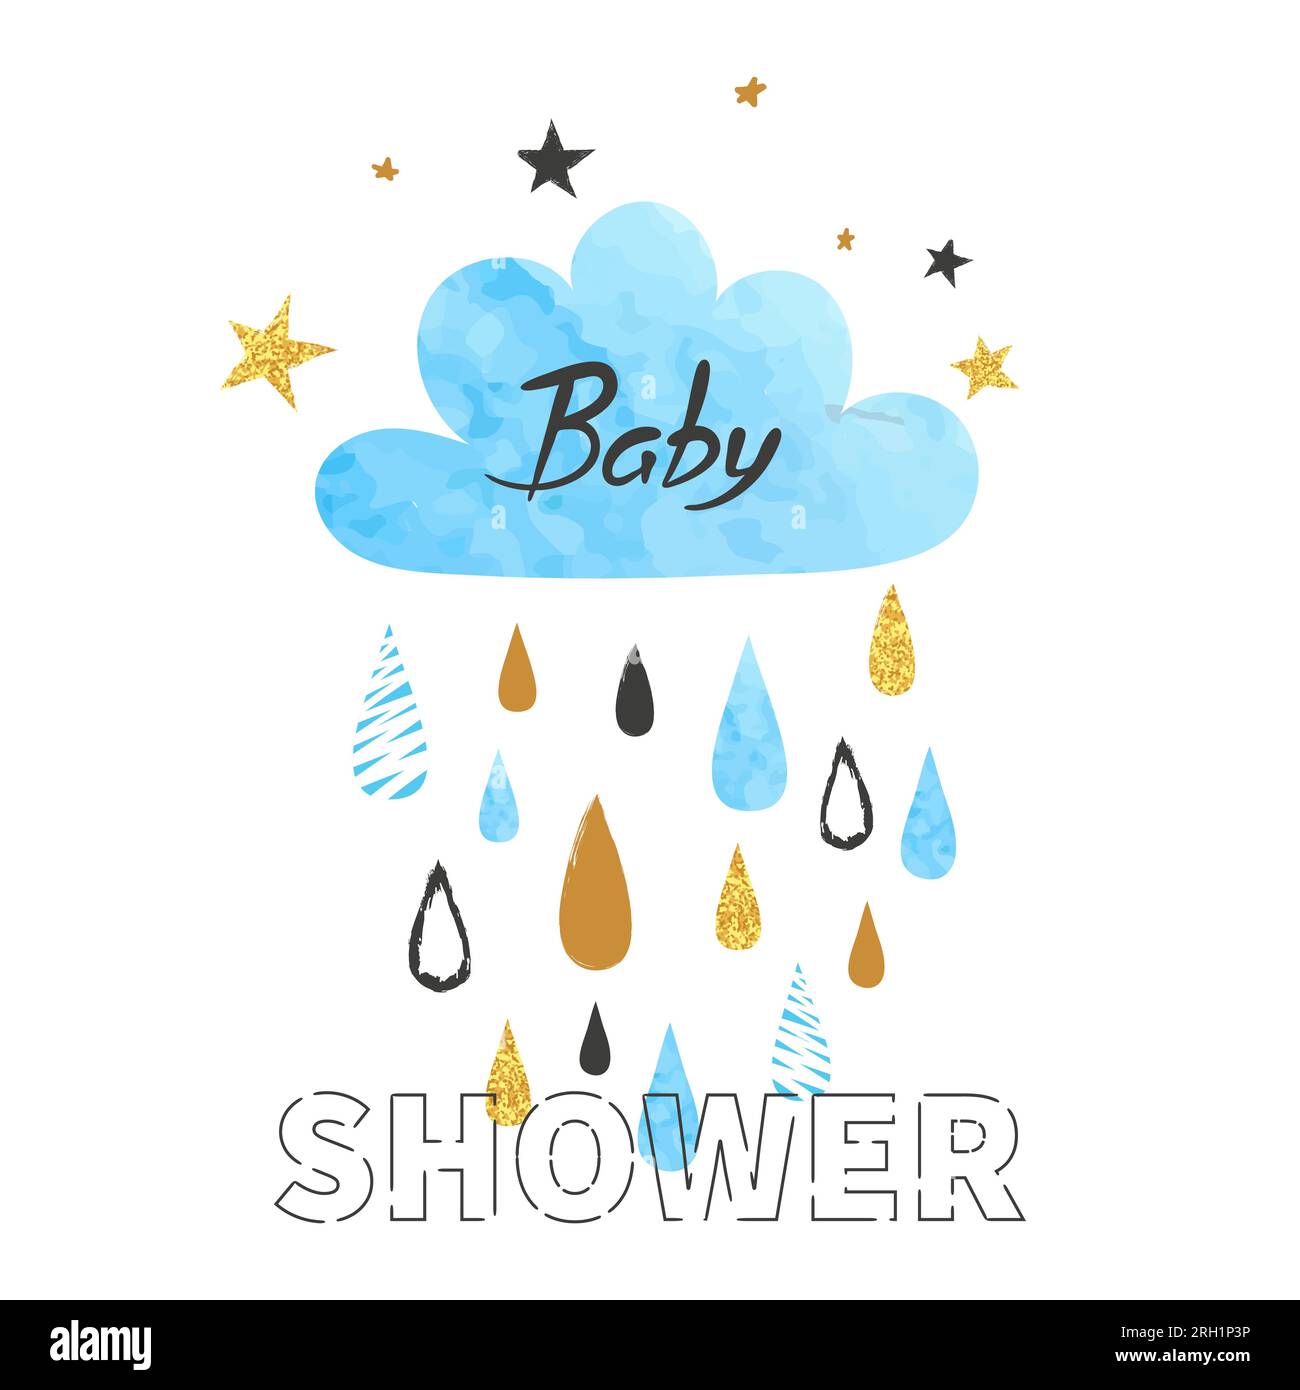 Baby shower vector illustration with rainy cloud. Stock Vector